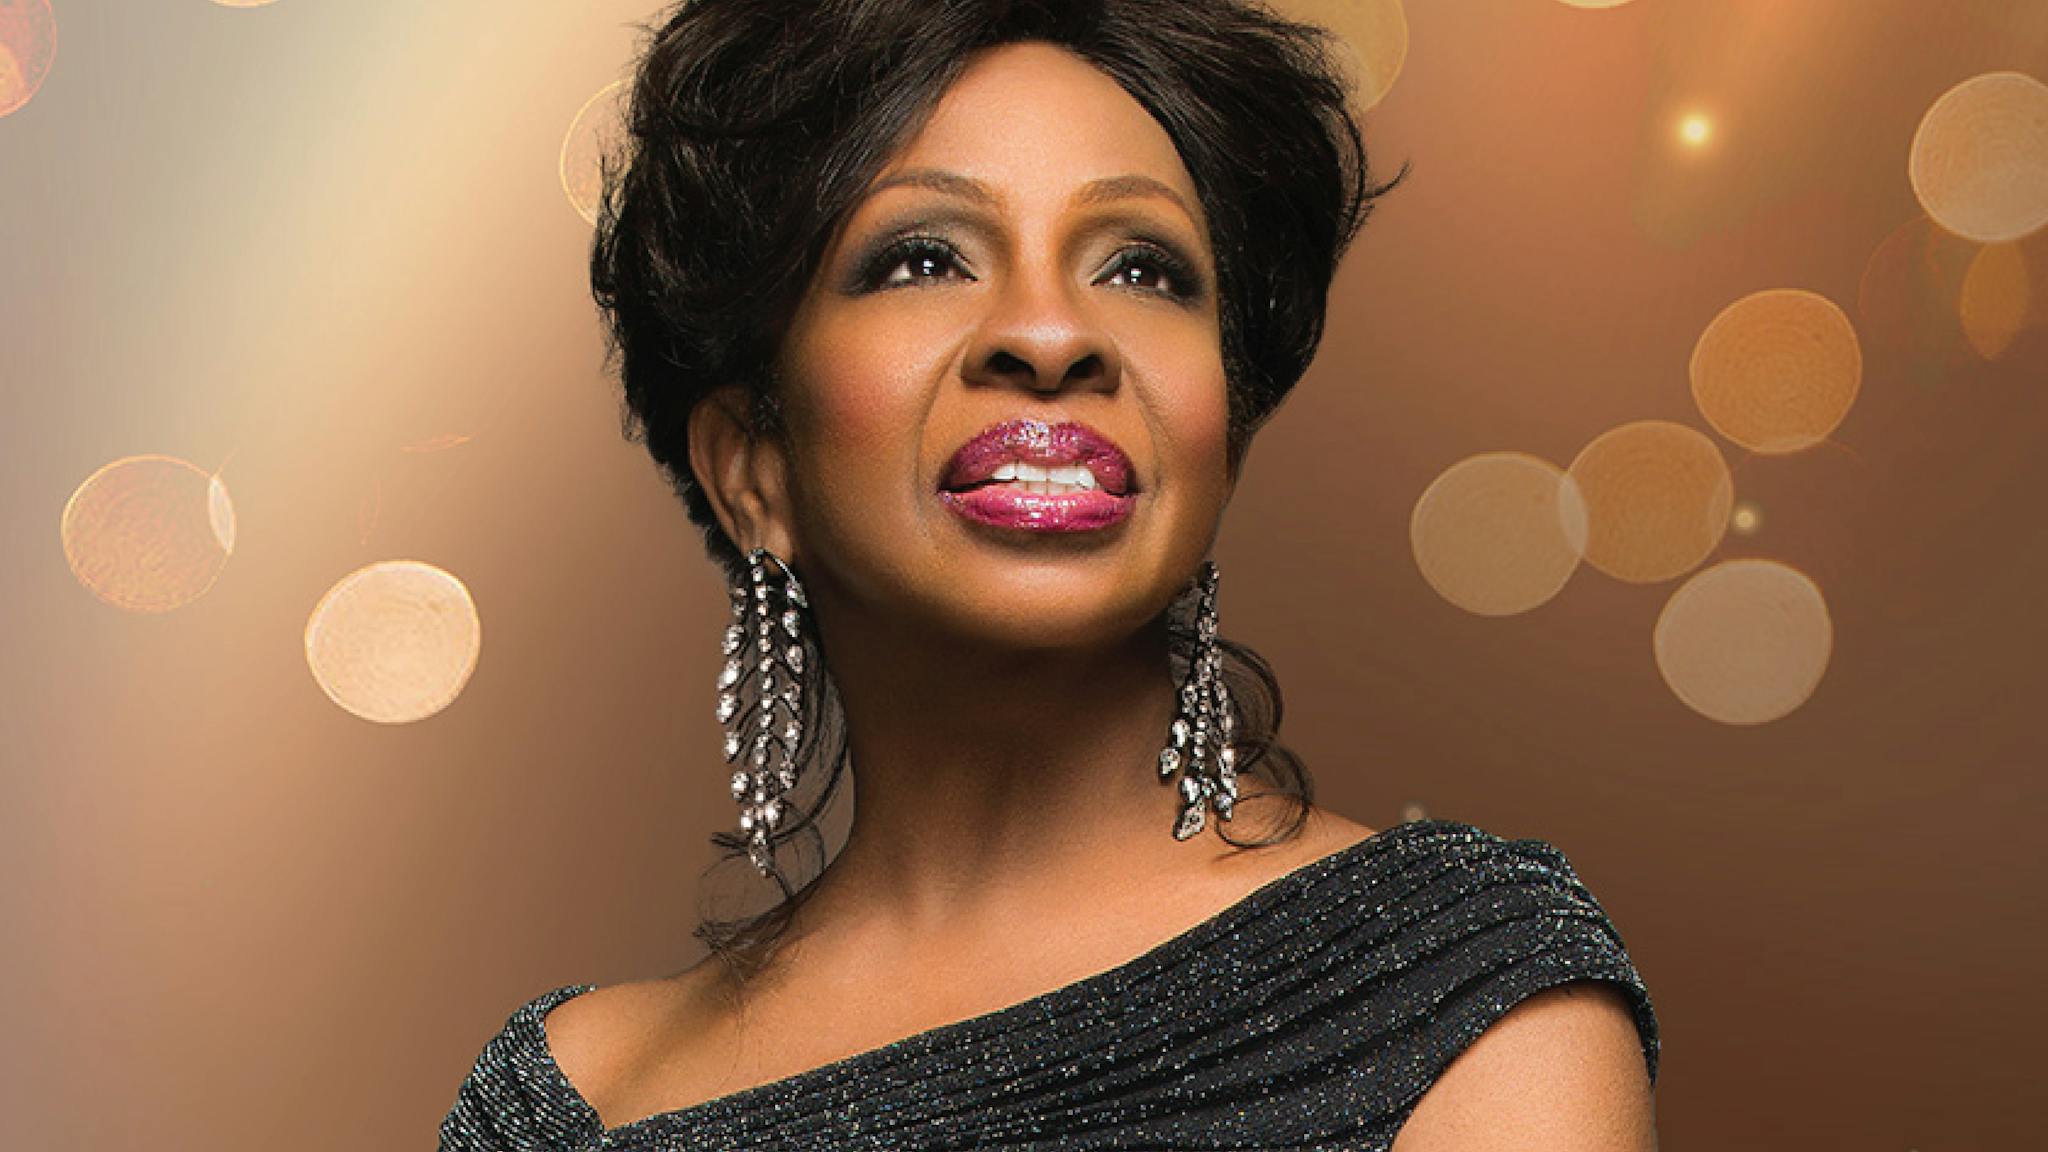 Gladys Knight in a black dress looking to the right in front of a glittery brown backdrop